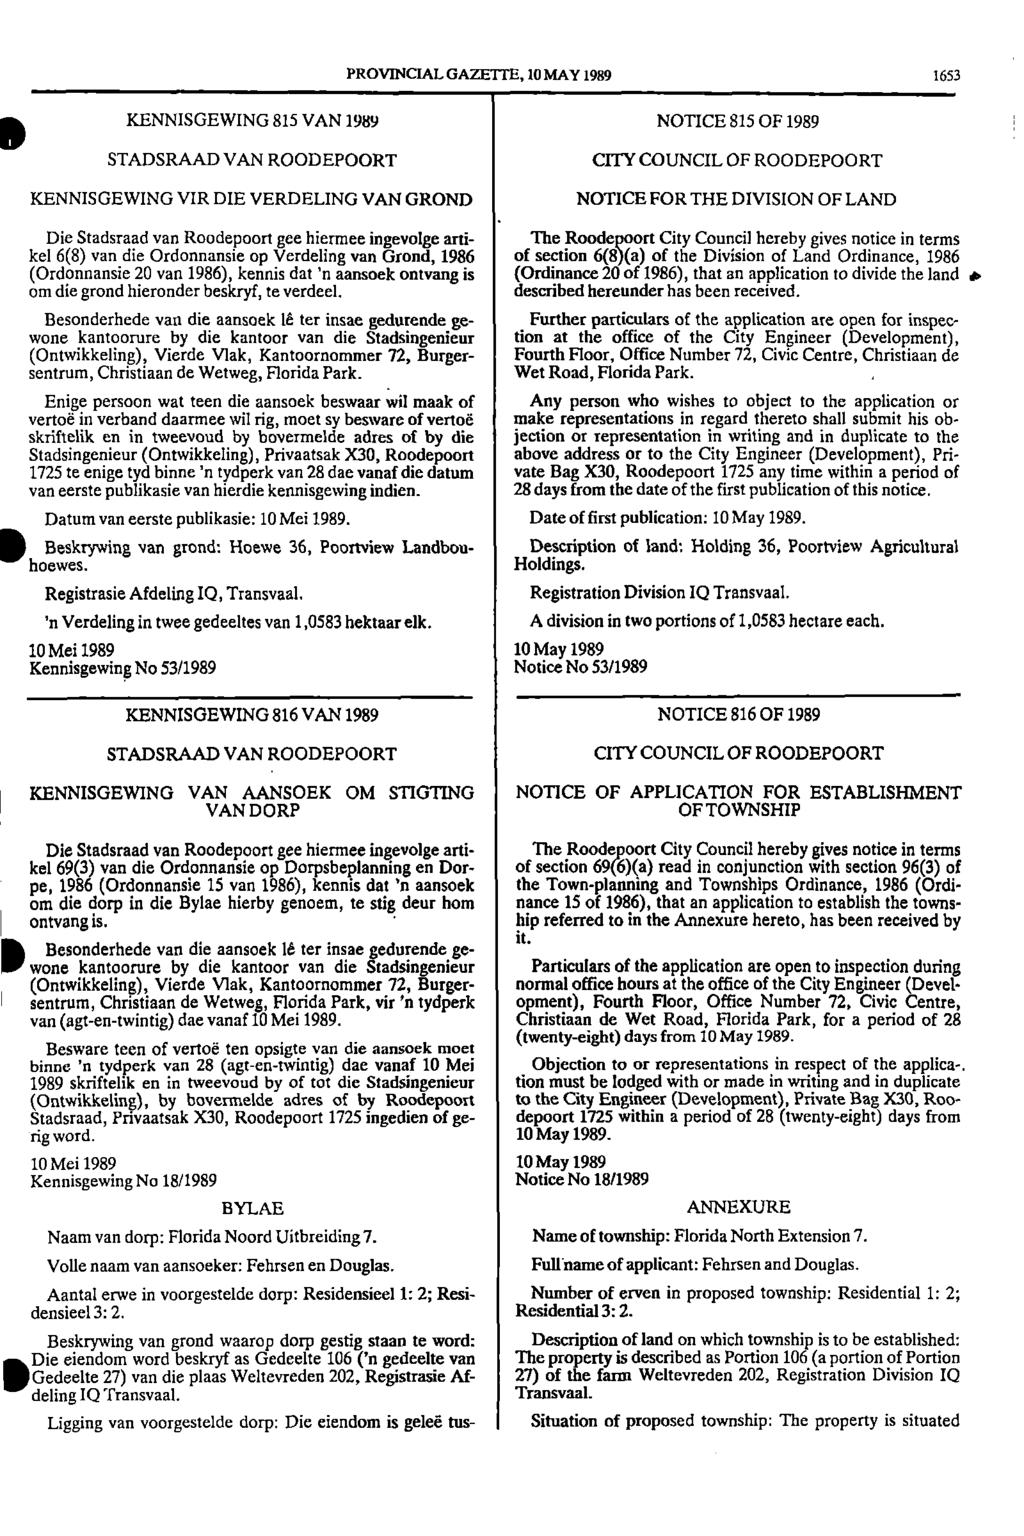 PROVINCIAL GAZETTE, 10 MAY 1989 1653 KENNISGEWING 815 VAN 1989 NOTICE 815 OF 1989 STADSRAAD VAN ROODEPOORT CITY COUNCIL OF ROODEPOORT KENNISGEWING VIR DIE VERDELING VAN GROND NOTICE FOR THE DIVISION